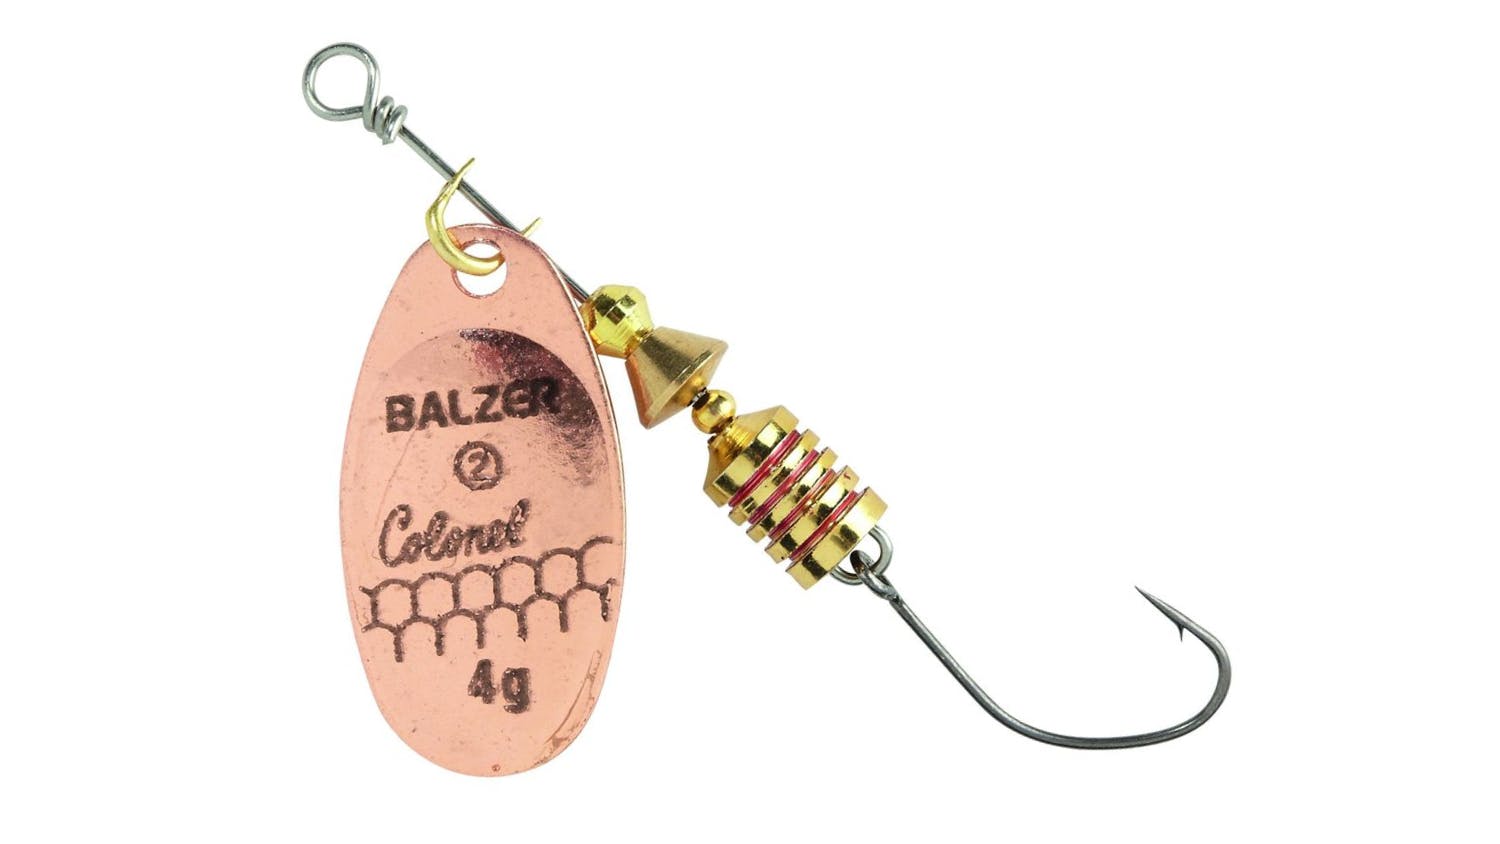 Colonel Classic Trout Spinner Lure Single Hook 4g - Black Beauty